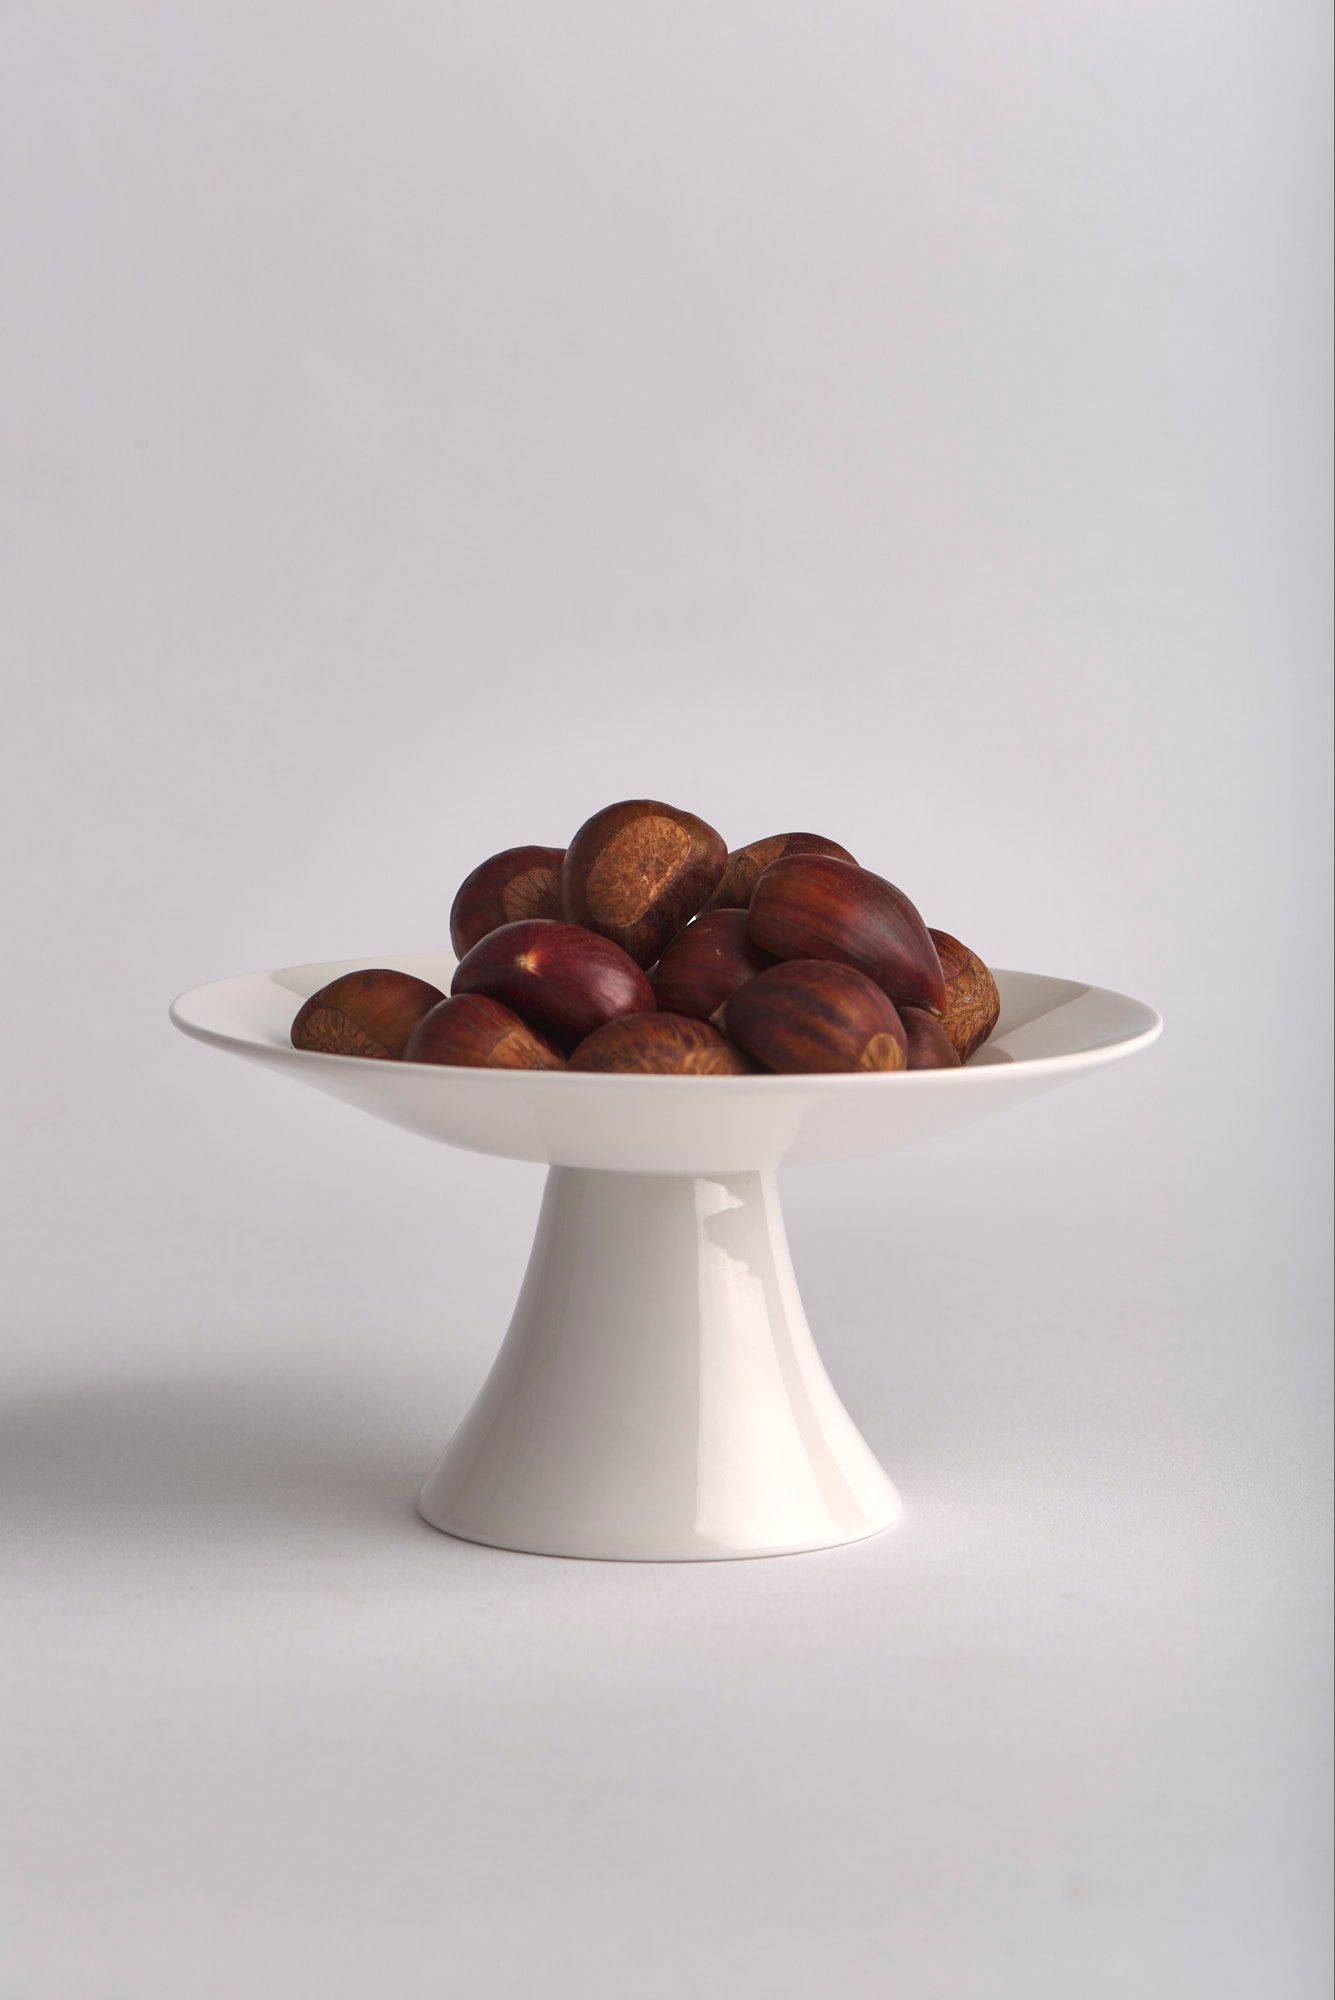 chestnuts on a small stand on white background